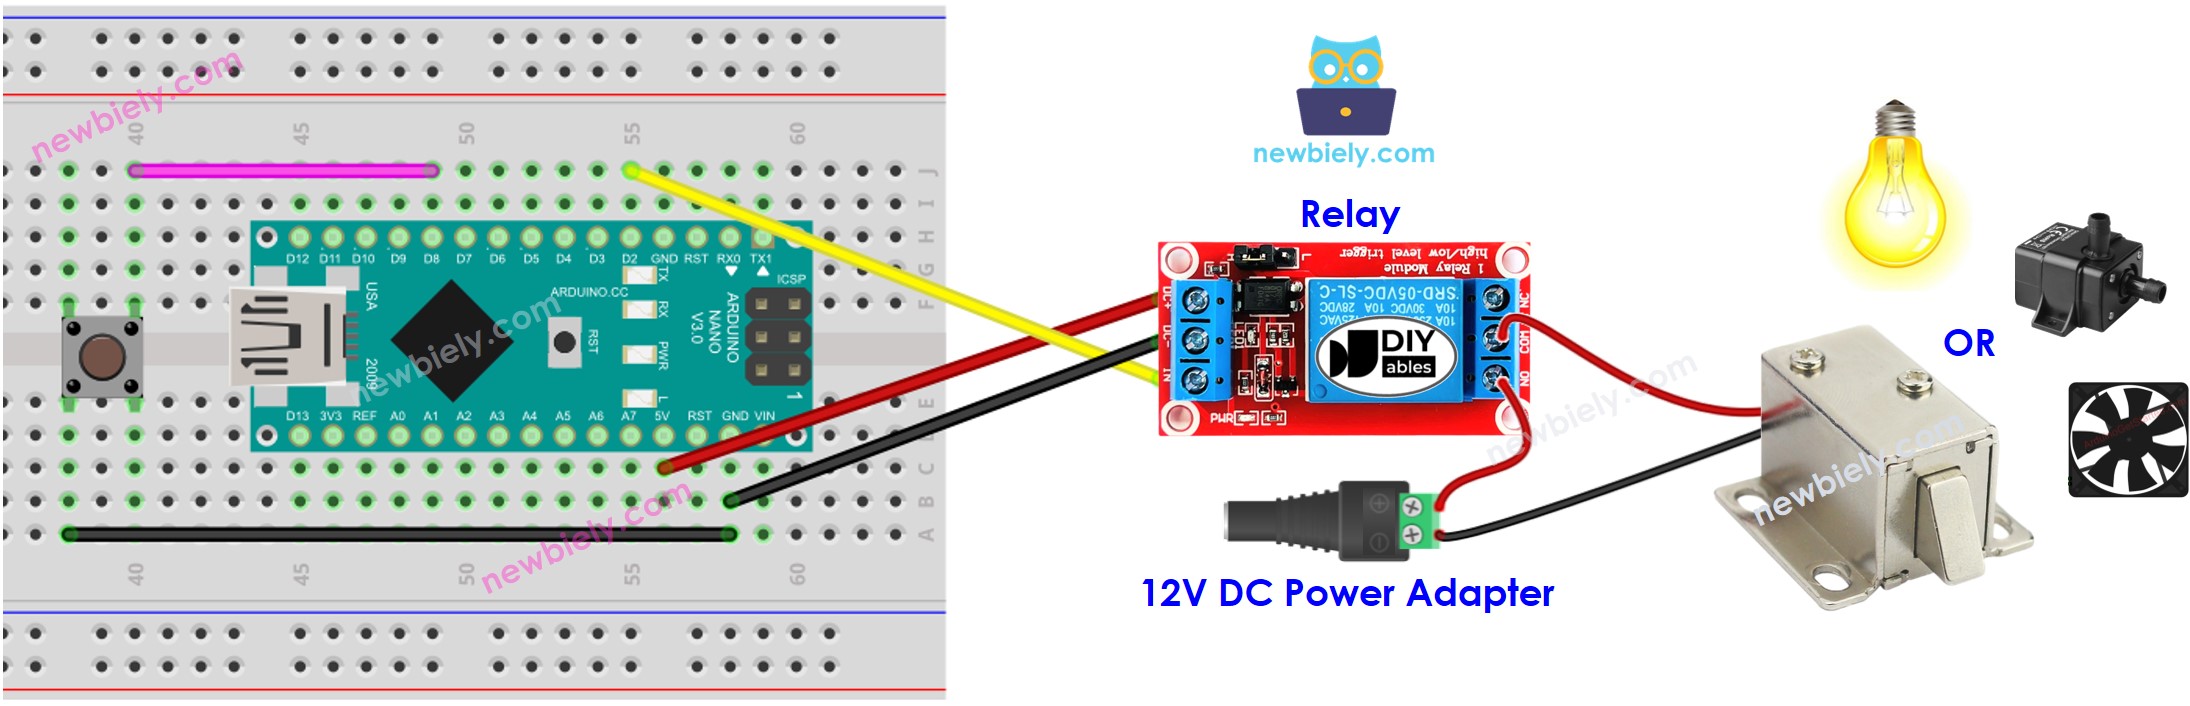 The wiring diagram between Arduino Nano and Button relay